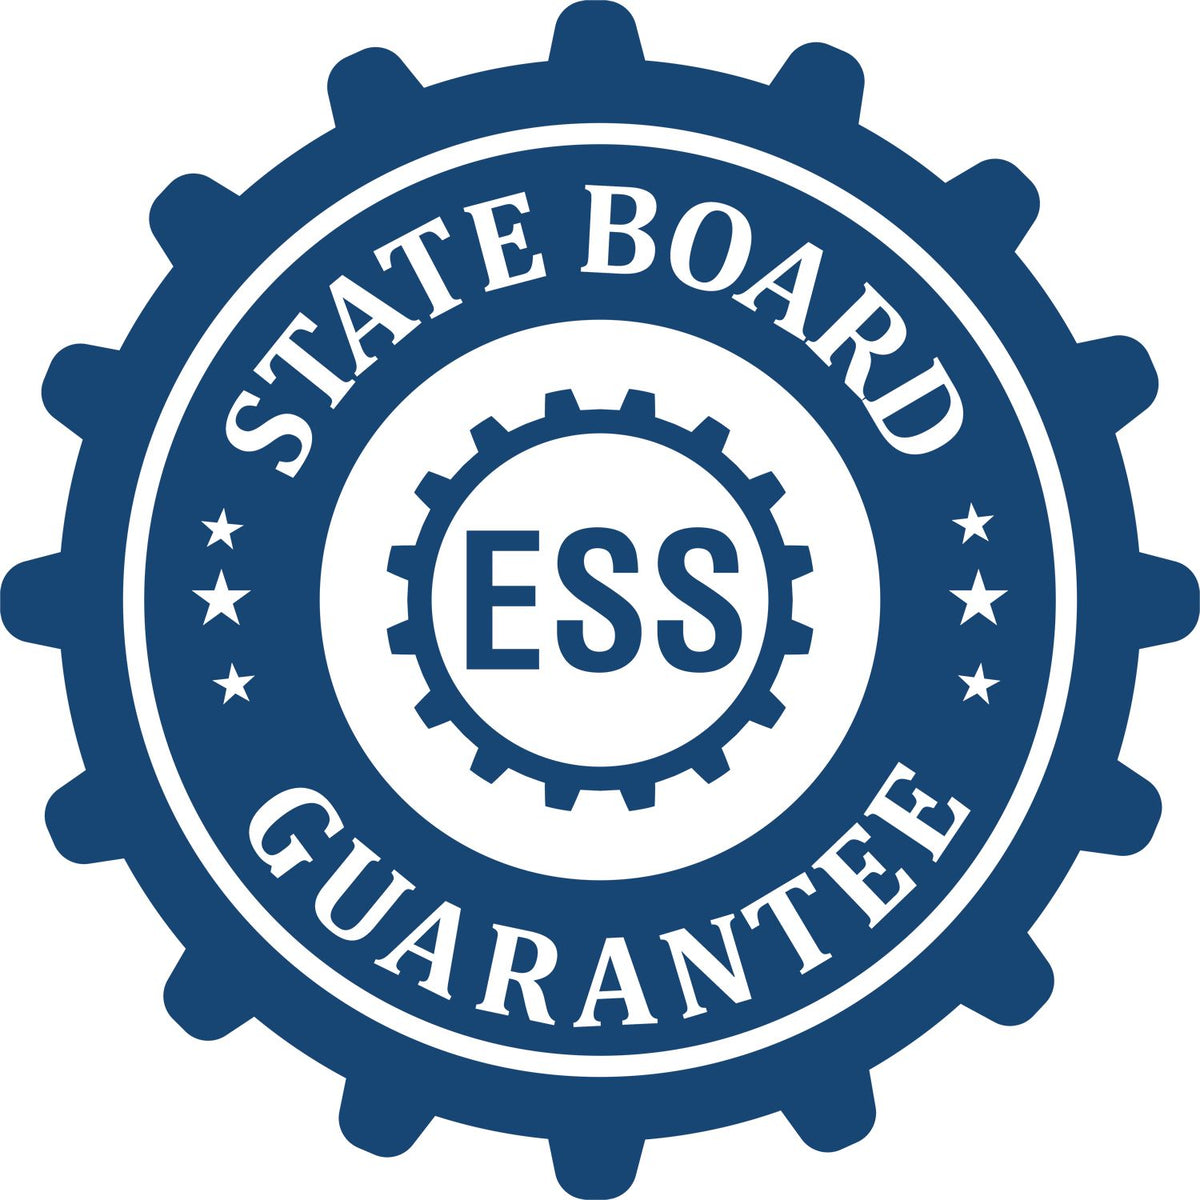 An emblem in a gear shape illustrating a state board guarantee for the State of Iowa Extended Long Reach Engineer Seal product.